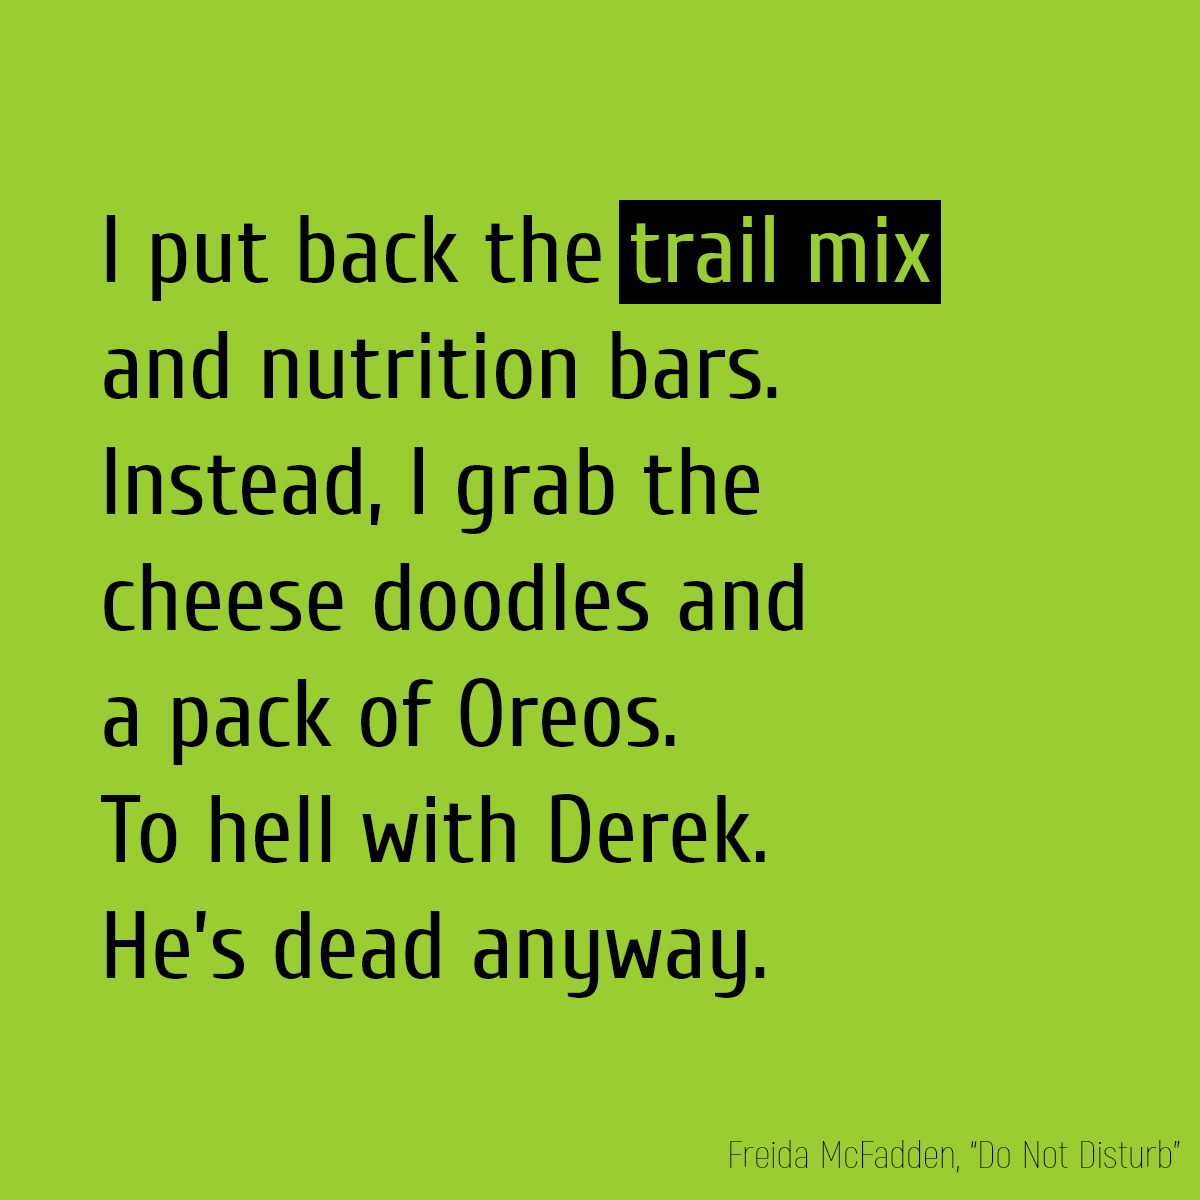 I put back the **trail mix** and nutrition bars. Instead, I grab the cheese doodles and a pack of Oreos. To hell with Derek. He’s dead anyway.